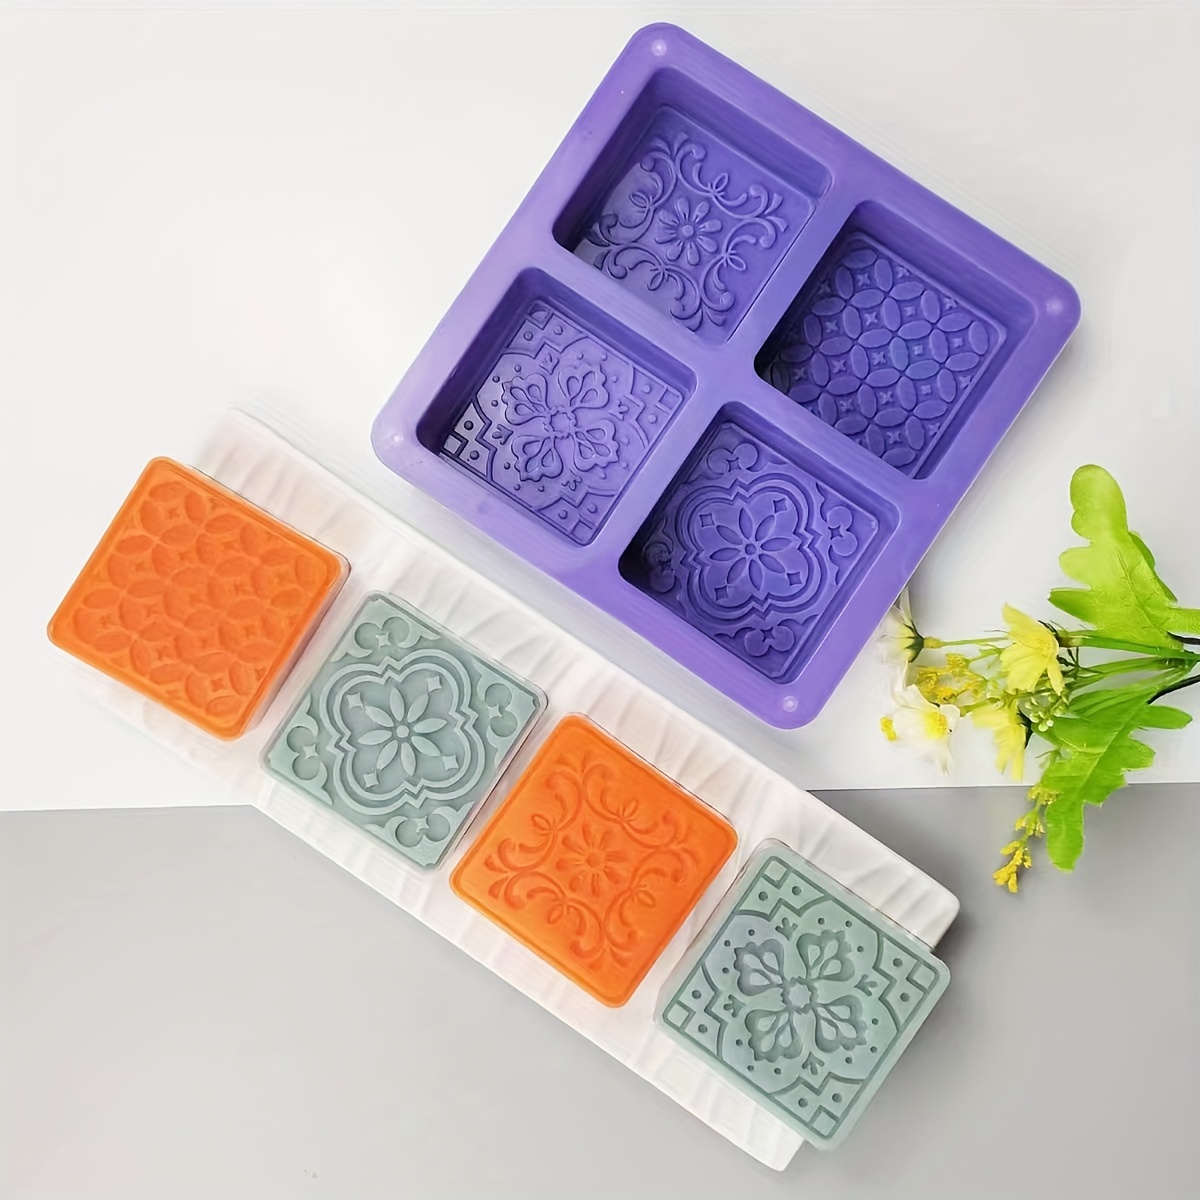 

Silicone Soap Molds Set Of 4 - Square Floral Patterns Diy Handmade Soap Making Molds - Flexible And Durable Silicone Material For Crafting Homemade Soaps